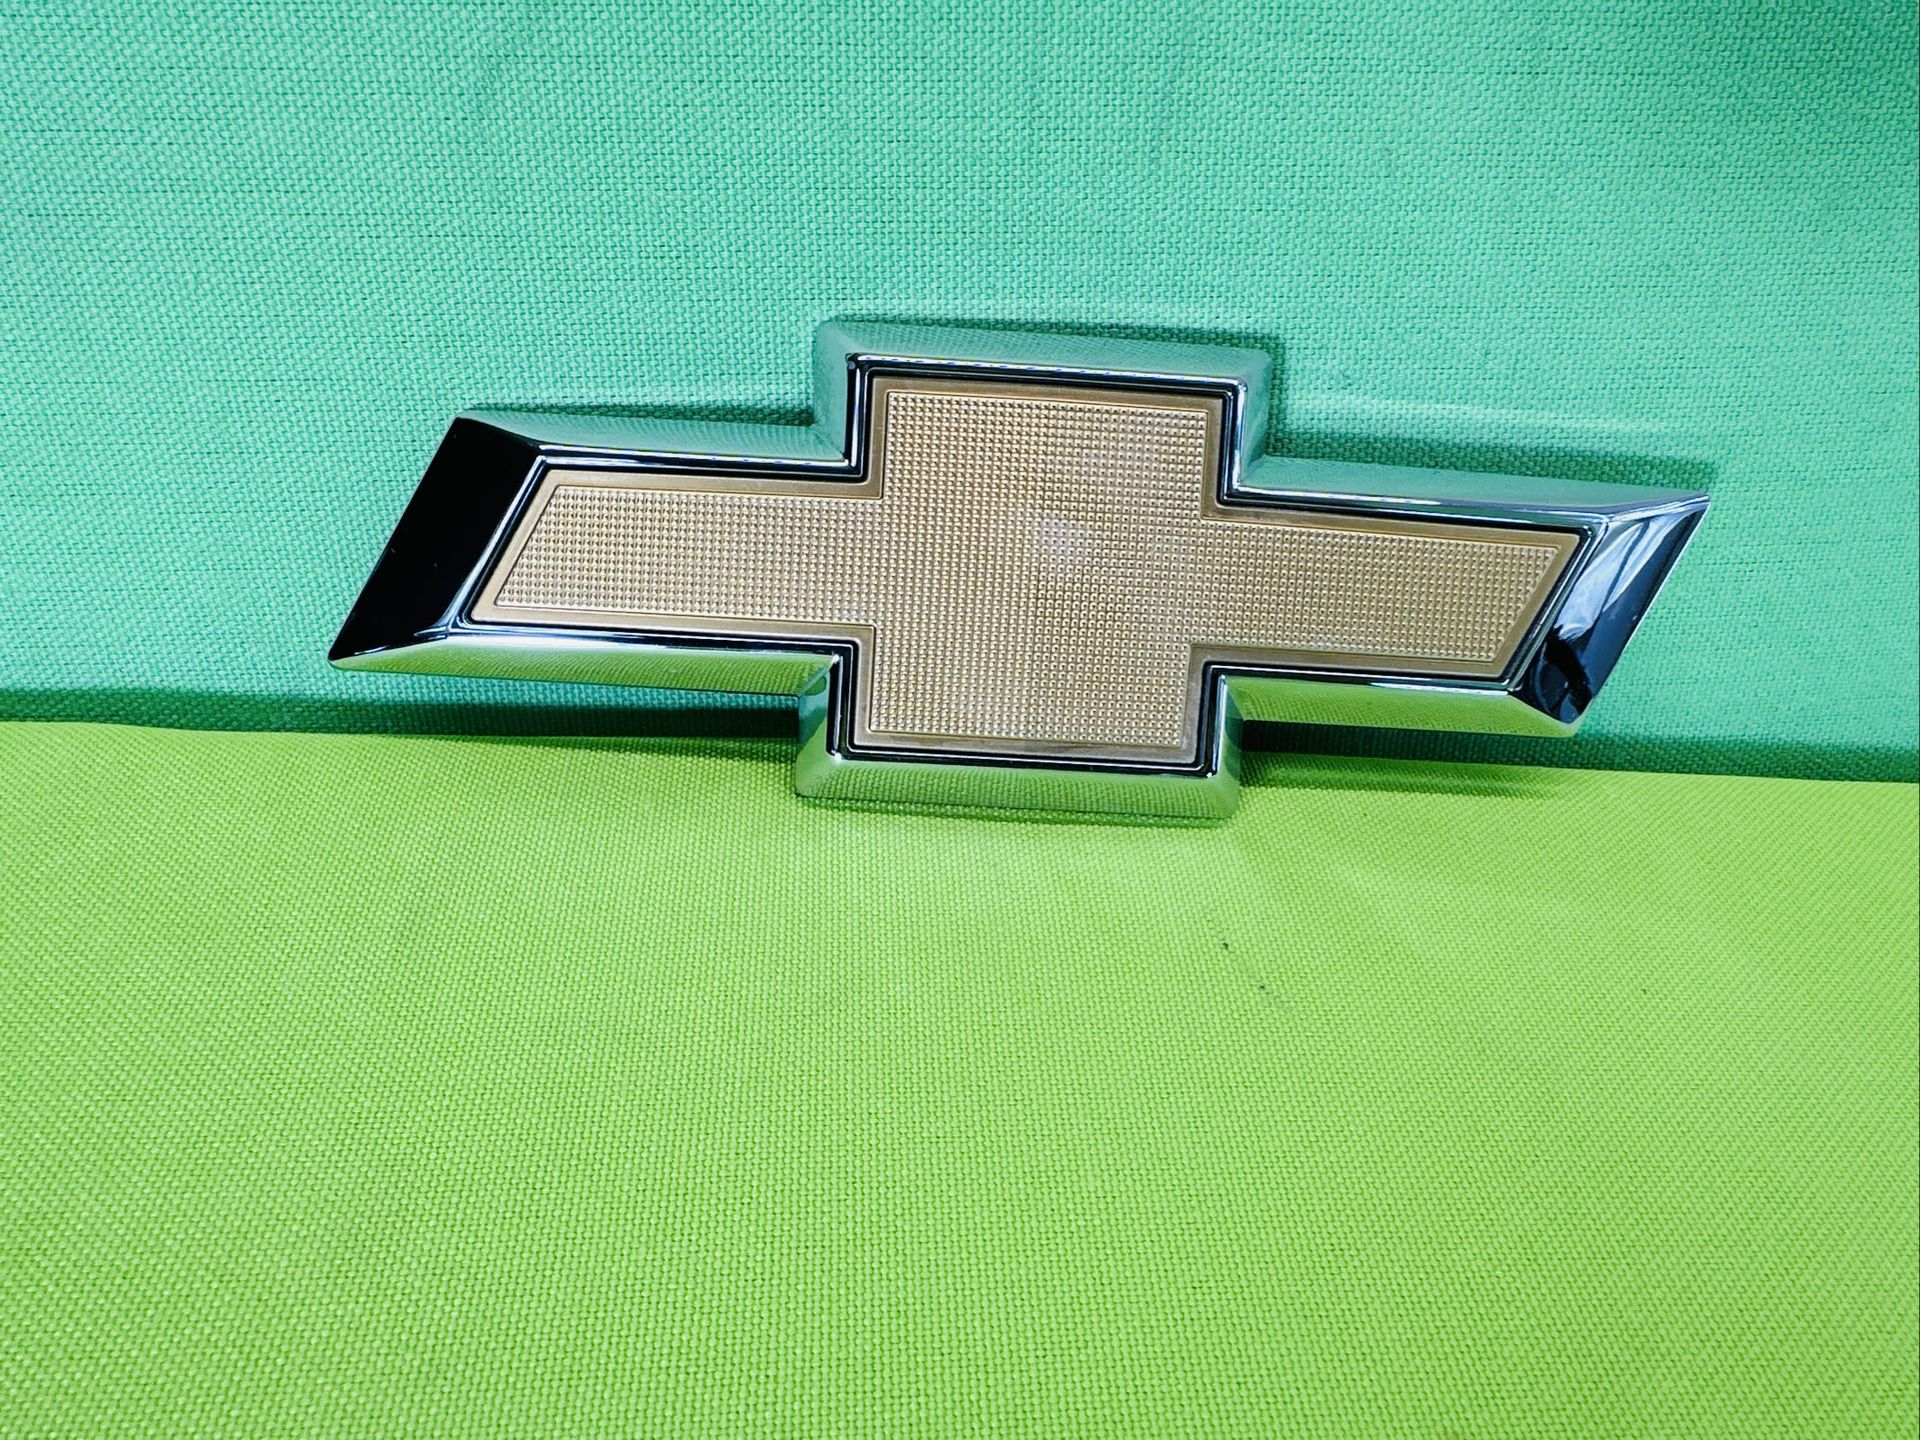 CHEVROLET GOLD AND CHROME TRUNK BOWTIE ADHESIVE EMBLEM OEM